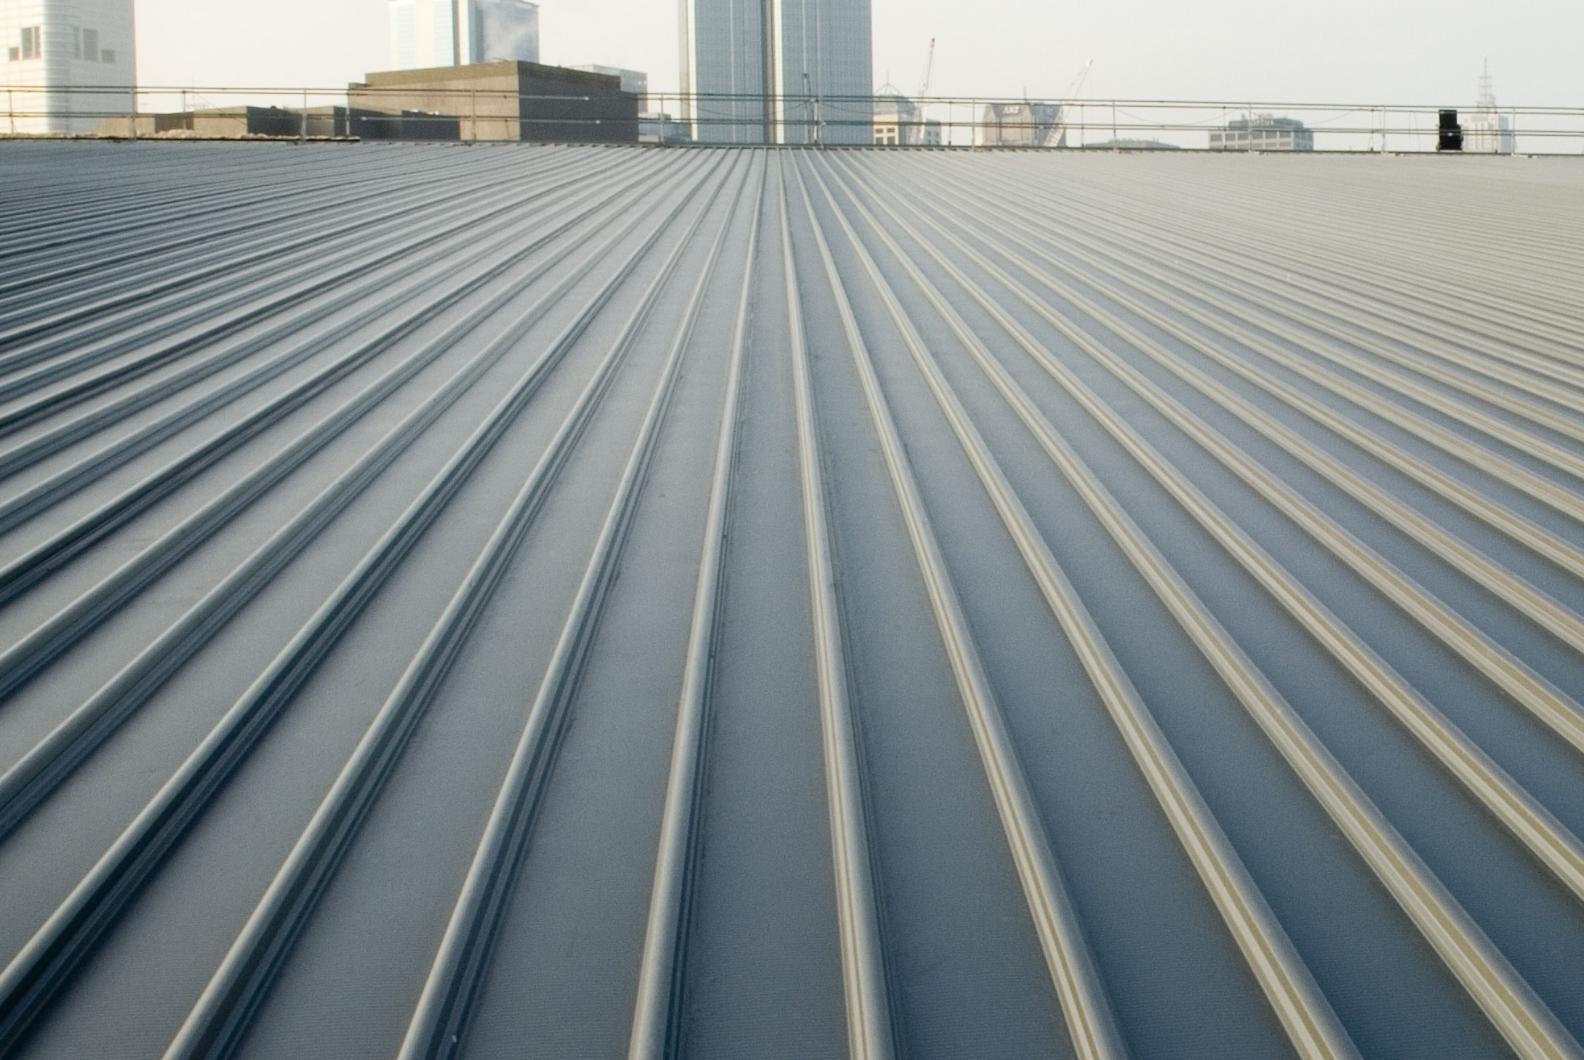 Convention centre with KLIP-LOK steel roofing manufactured from COLORBOND steel in colour Woodland Grey